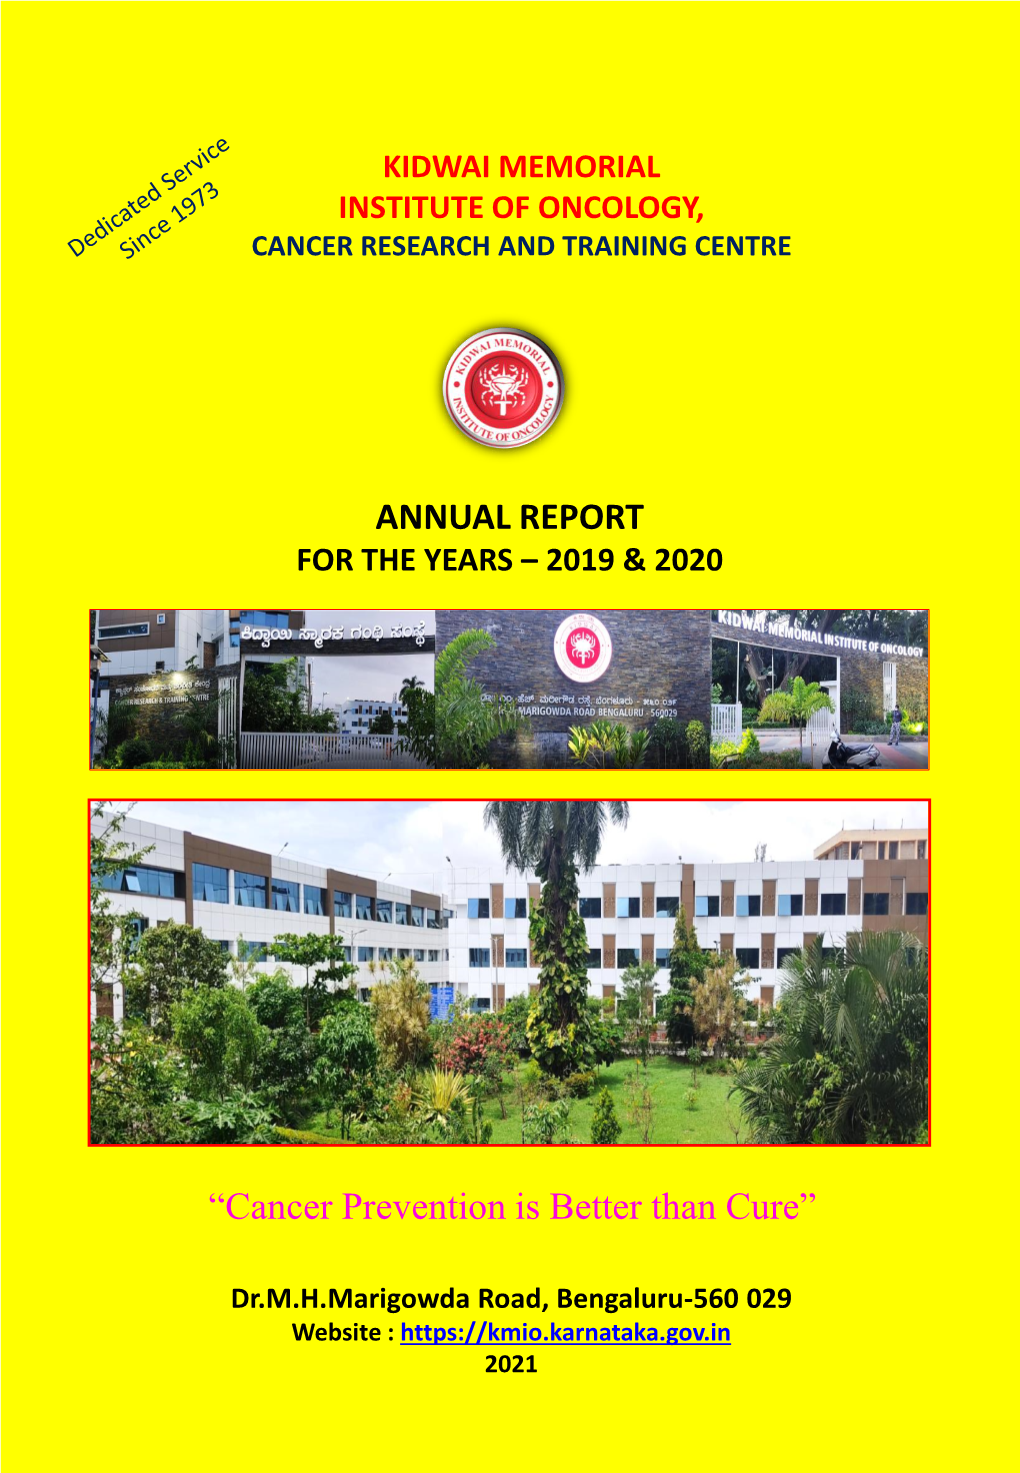 Annual Report for the Years 2019 and 2020